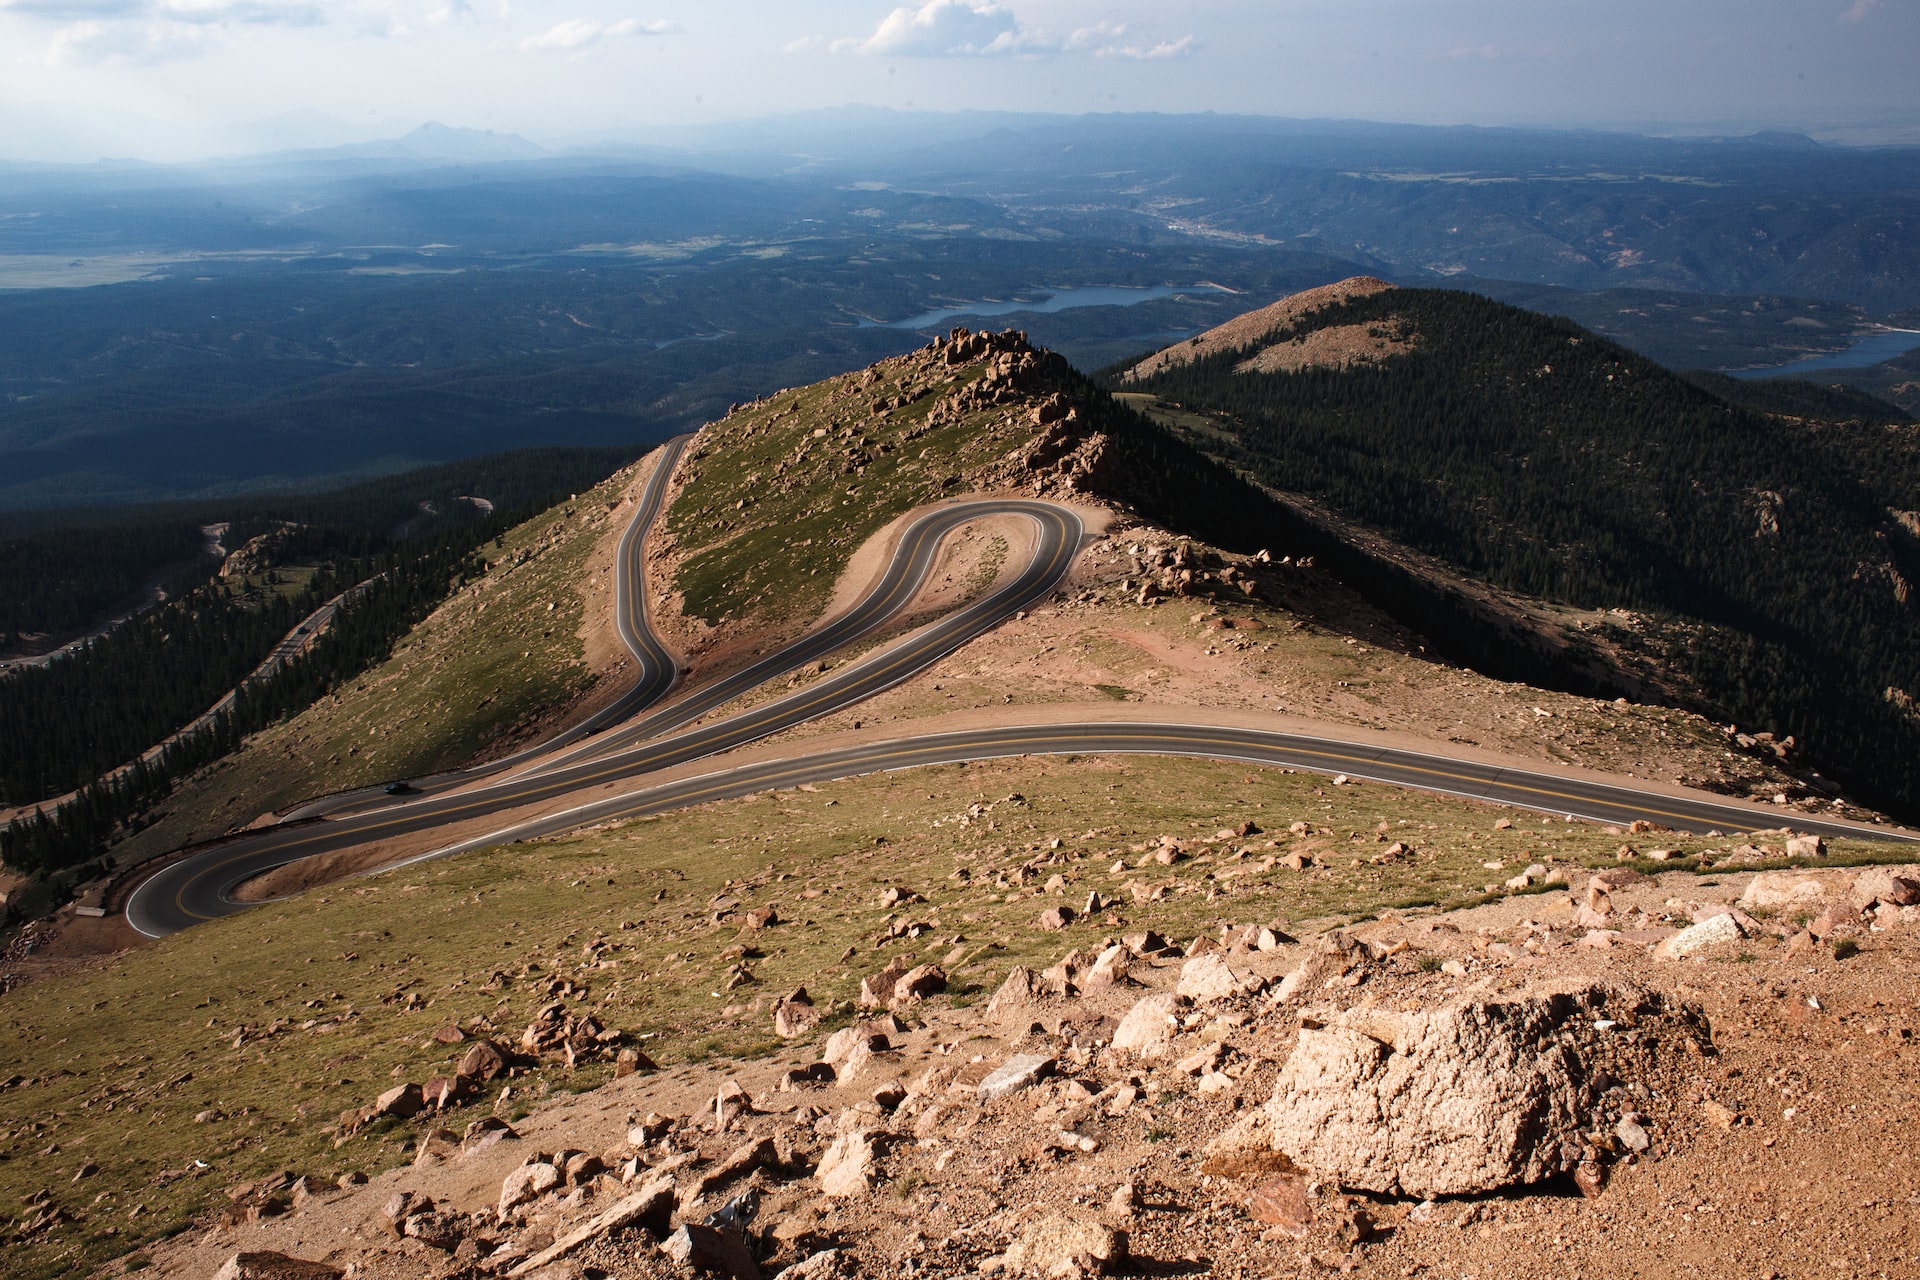 The winding road traveling up to Pikes Peak.